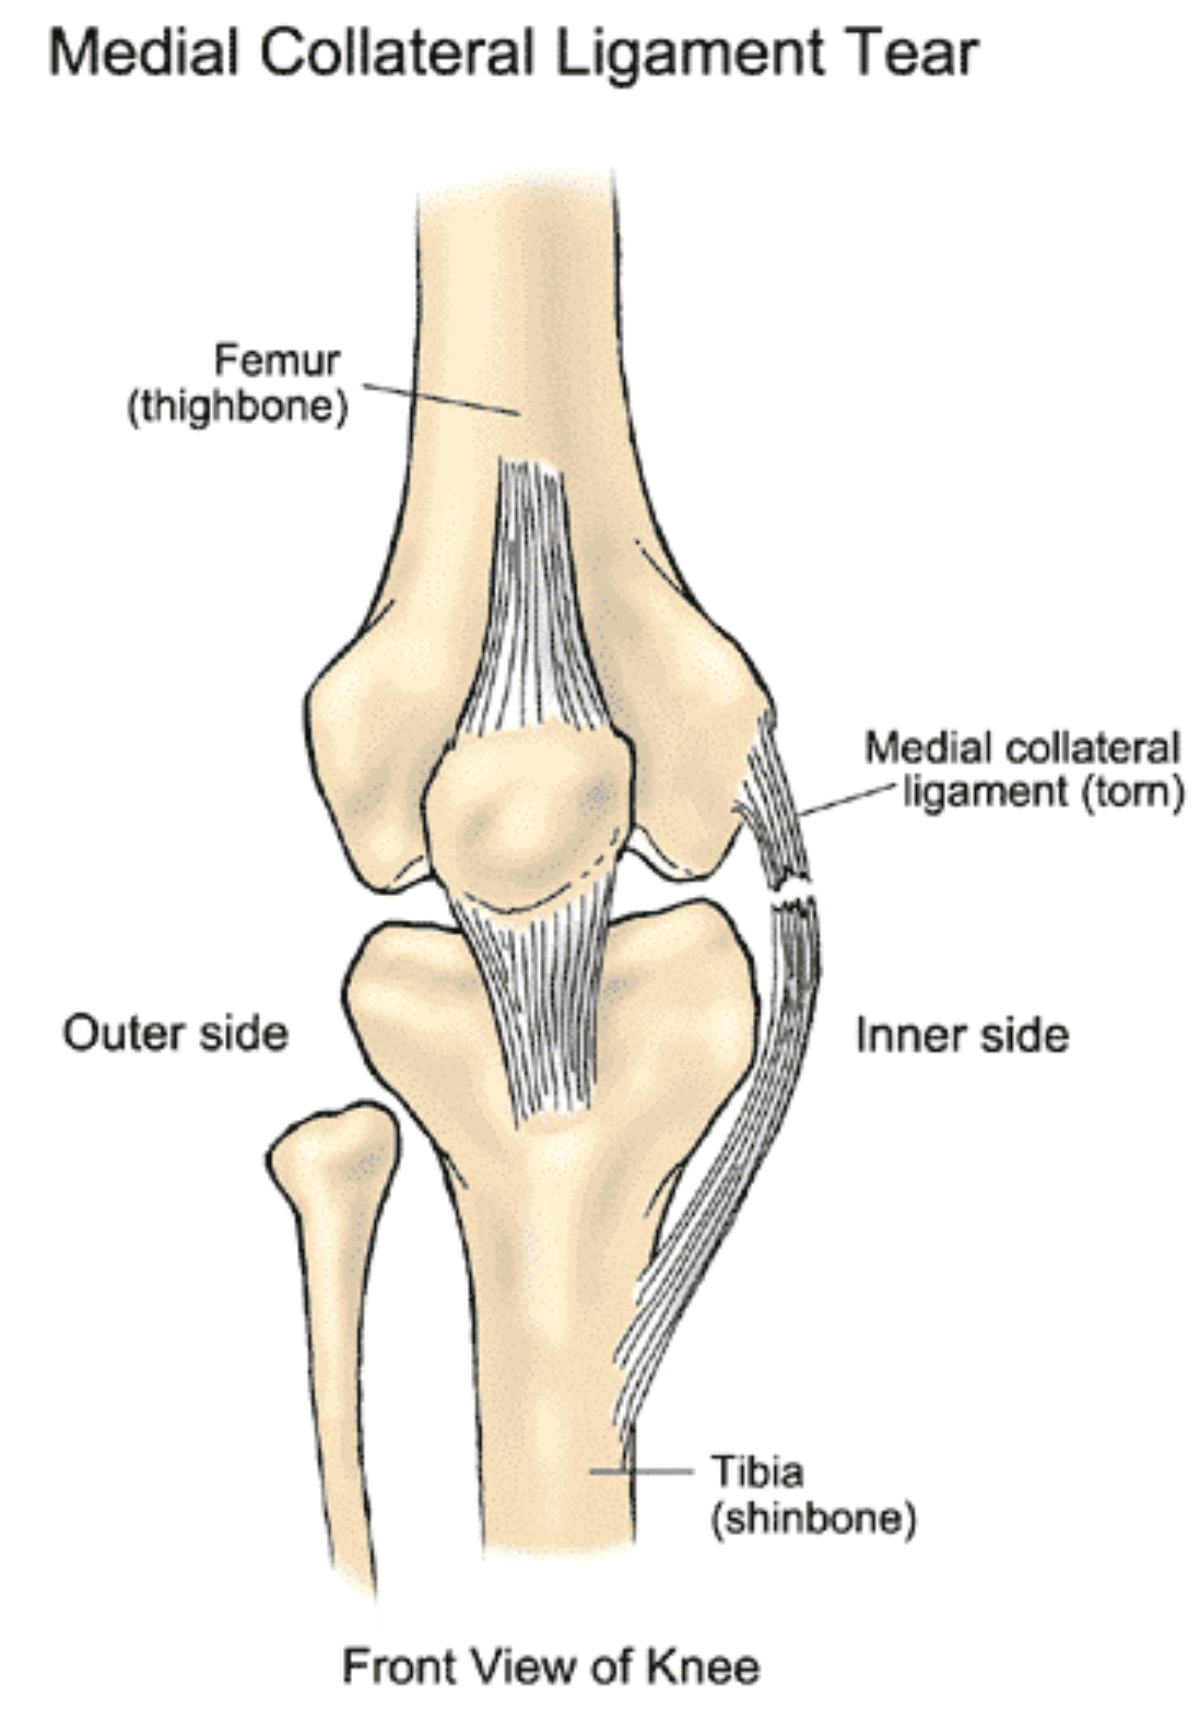 MEDIAL COLLATERAL LIGAMENT 